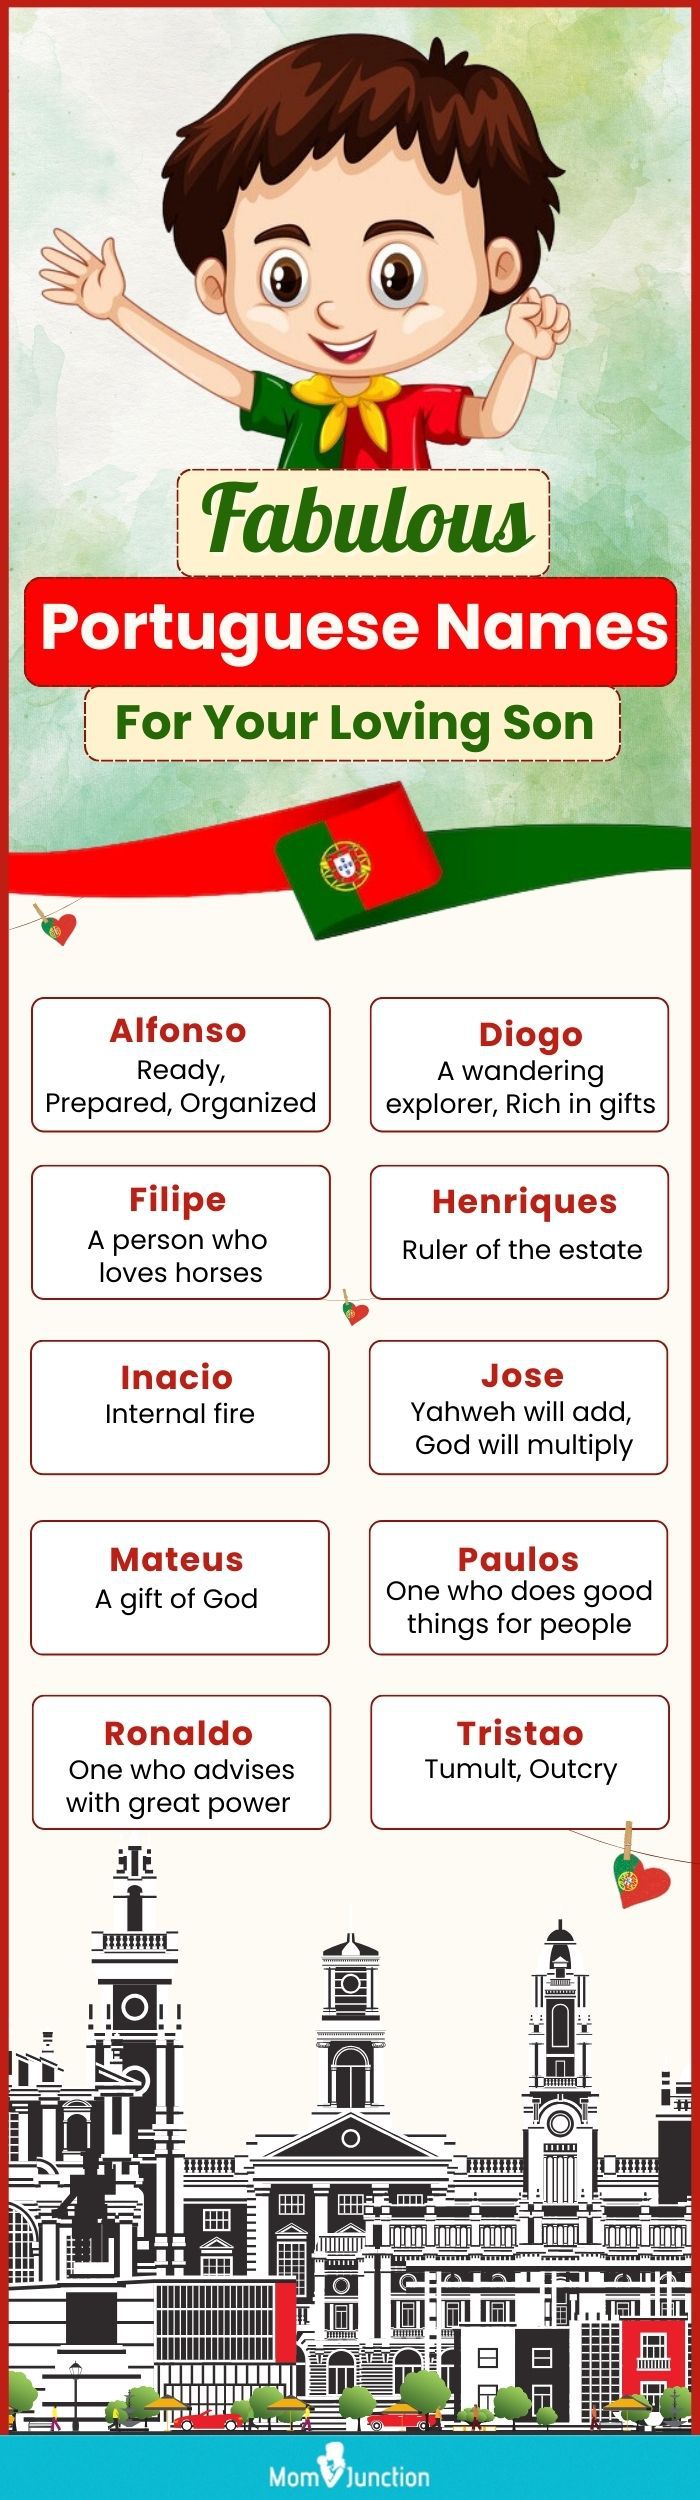 fabulous portuguese names for your loving son (infographic)